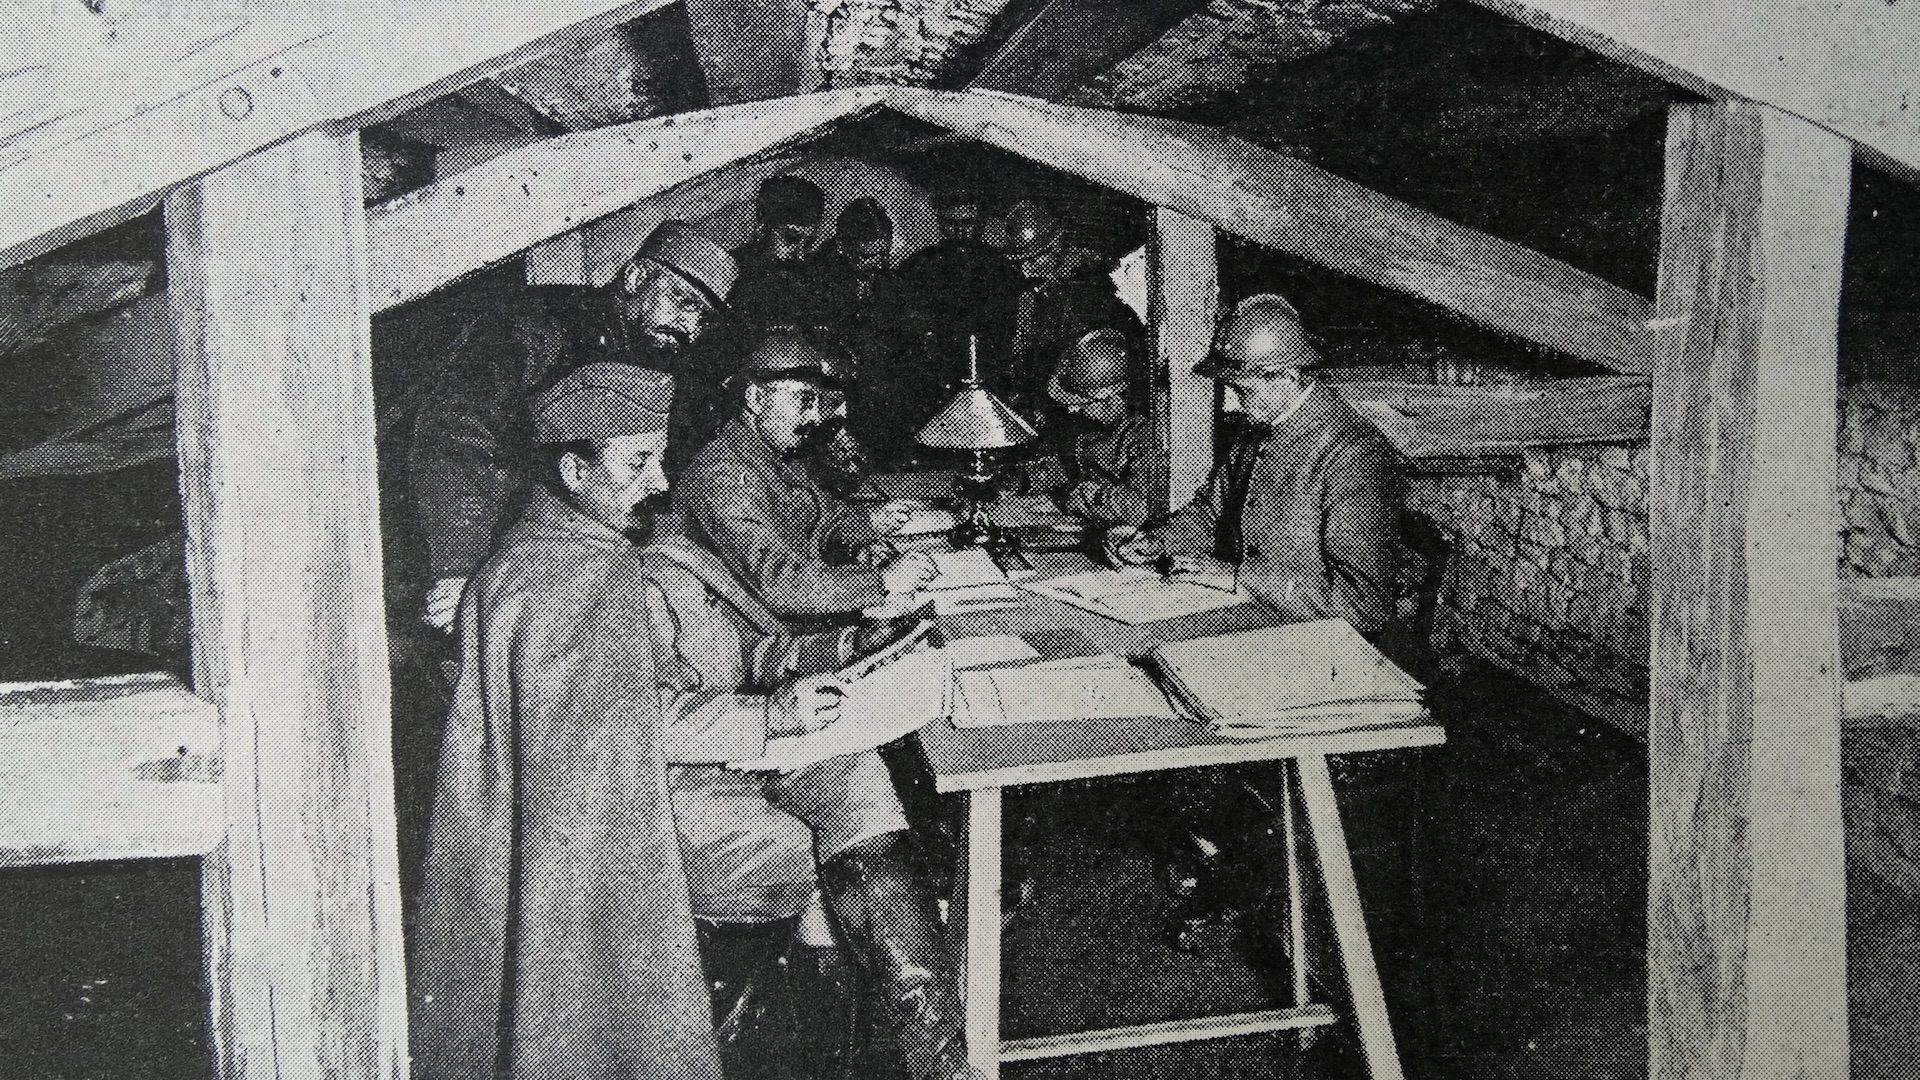 French officers in an underground HQ on the western front, during WWI.